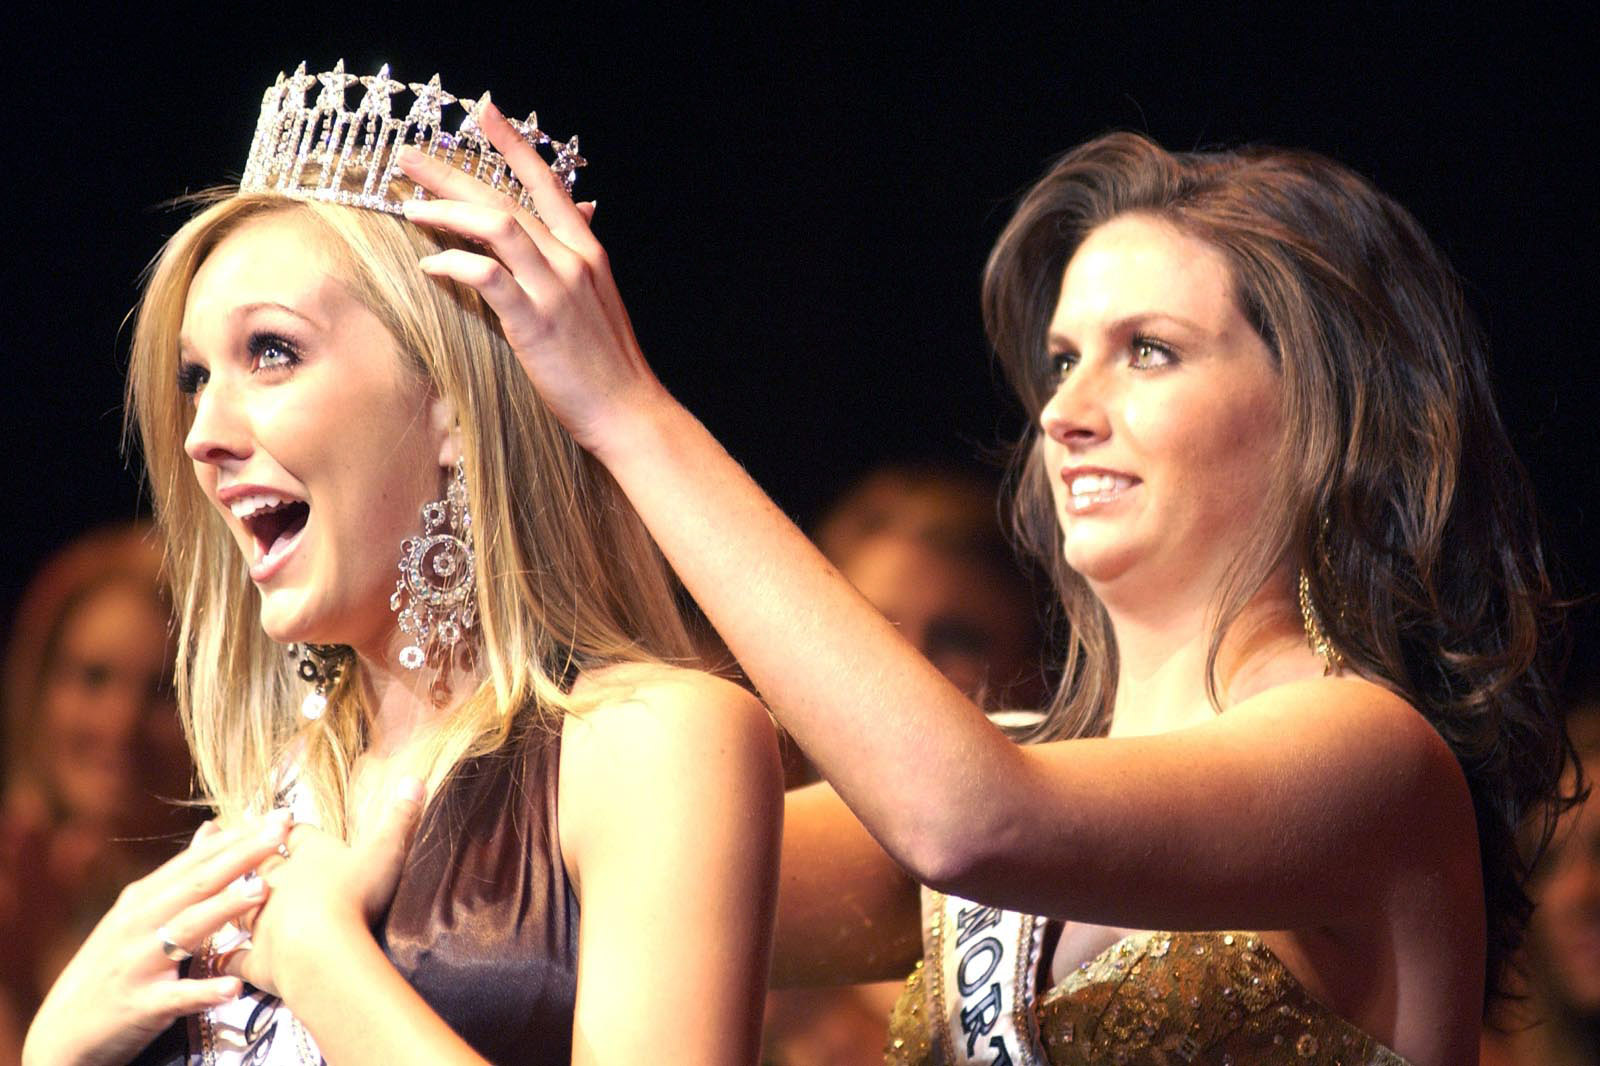 PHOTO: Miss North Carolina USA 2006 Erin O'Kelley, left, from Asheville, N.C., recieves her crown from Miss North Carolina USA 2005, Samantha Holvey, SOct. 28, 2006, in High Point, North Carolina. 